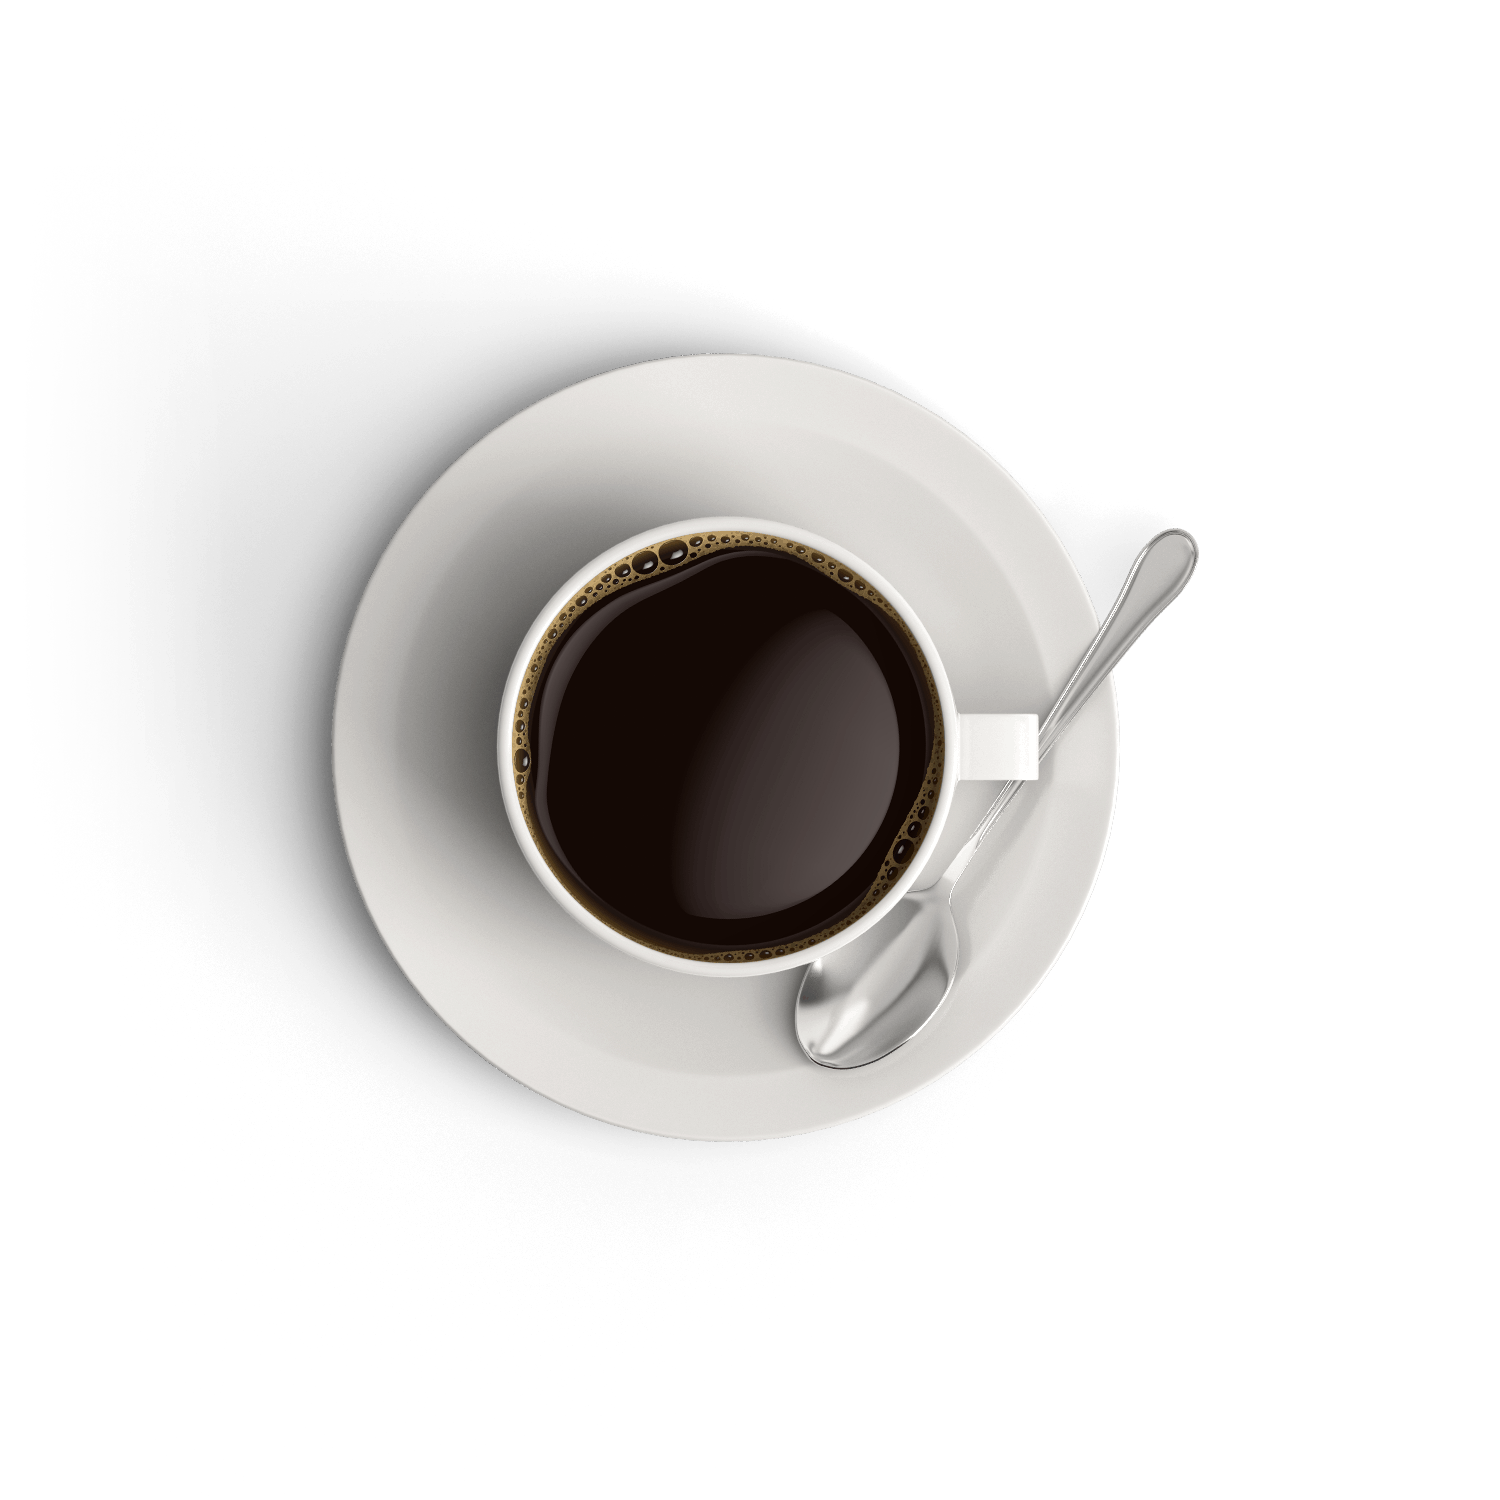 Image Of Coffee Cup To Represent Done For You Course Development Service